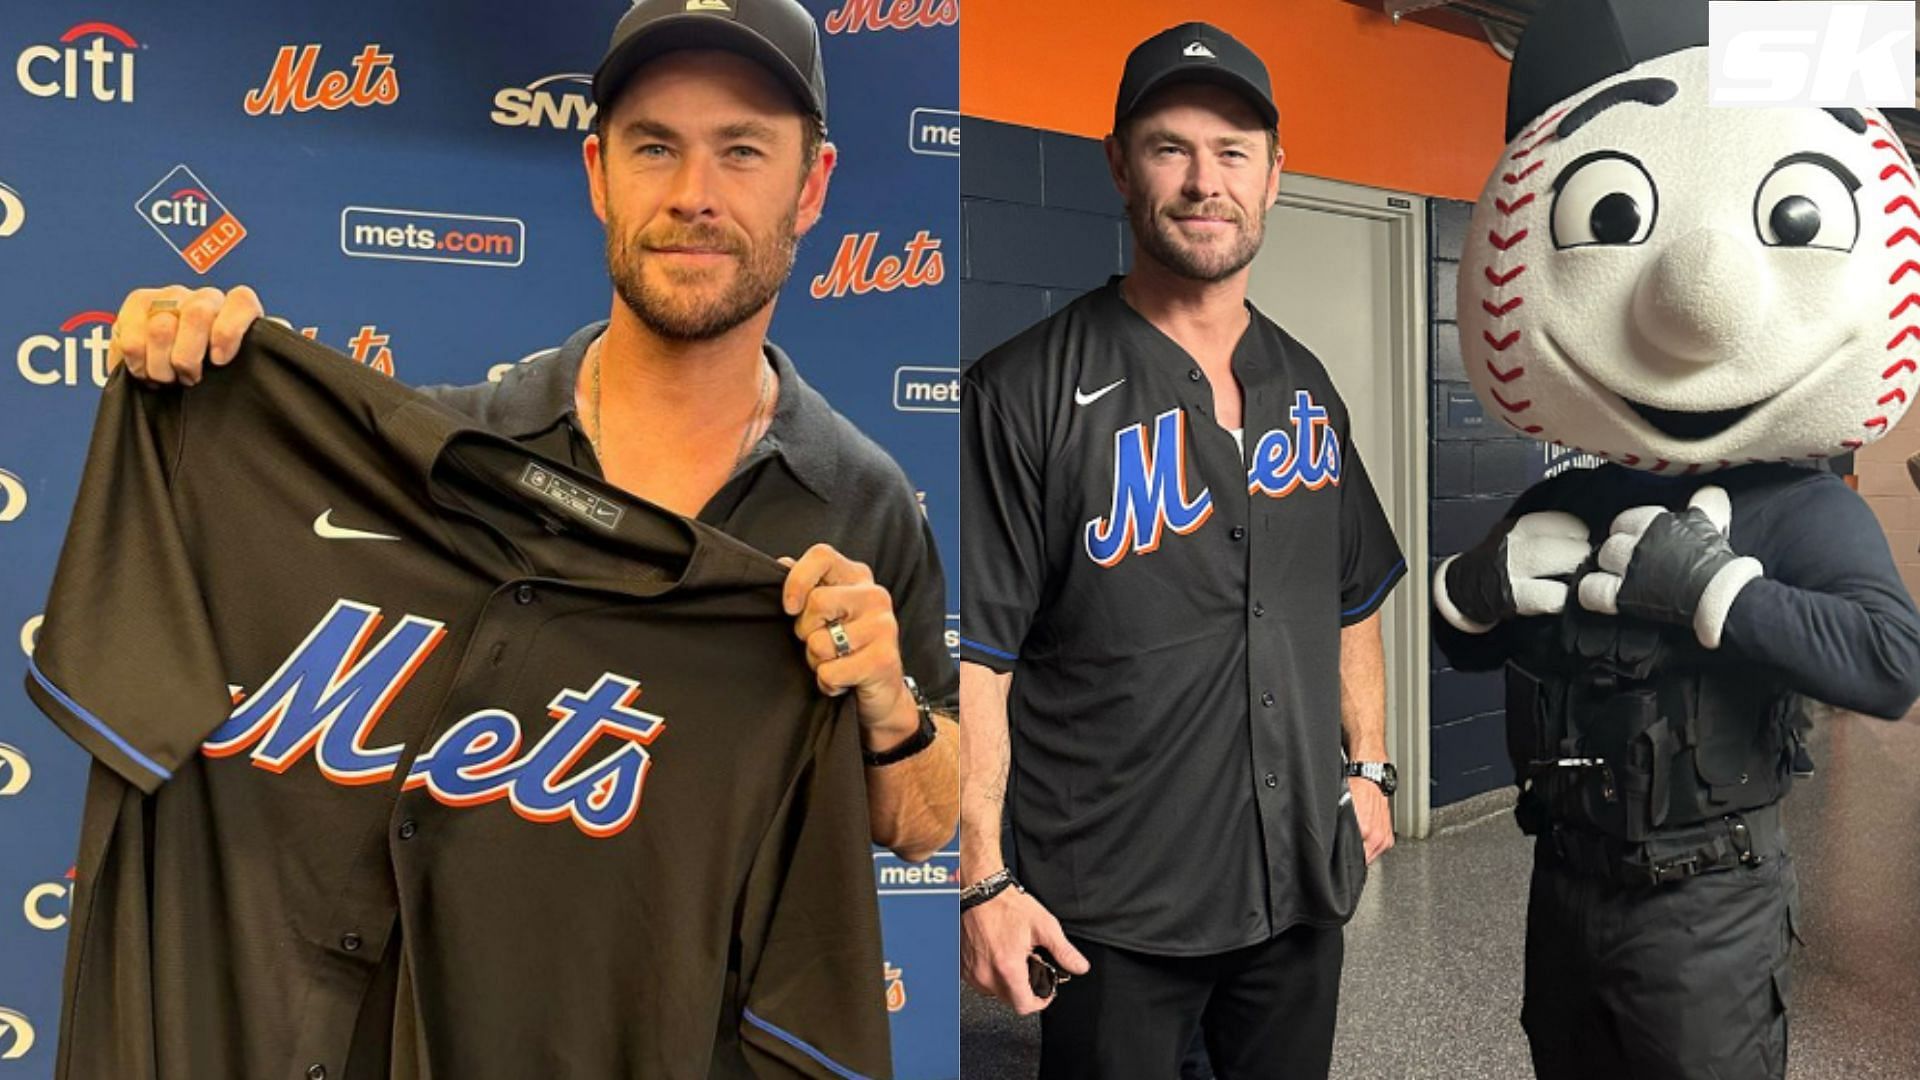 Chris Hemsworth spotted at Mets vs Yankees game. Picture credit: New York Mets Instagram, MLB Life Twitter 